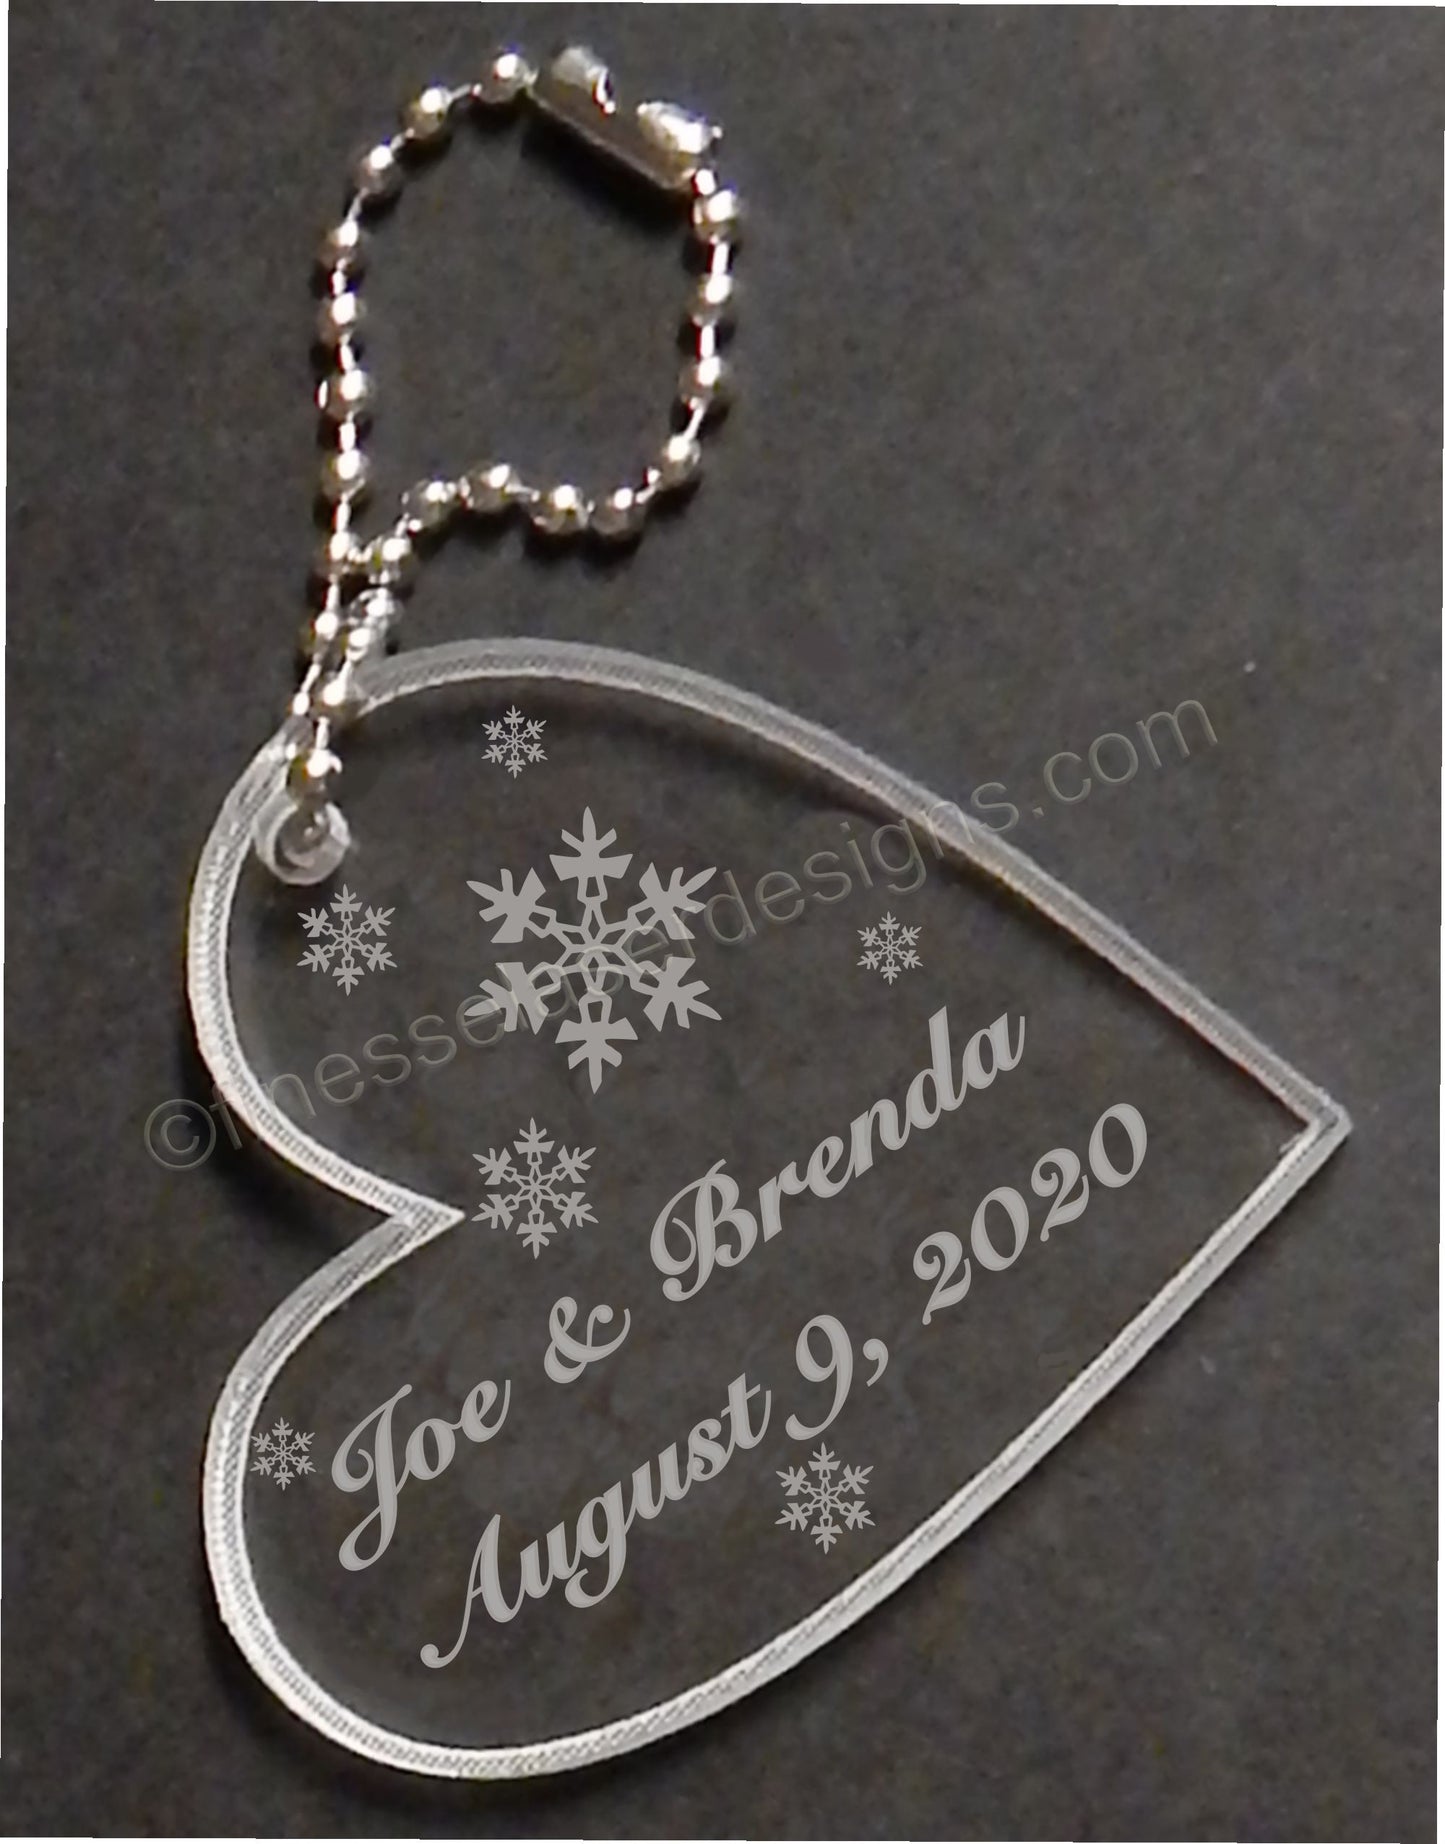 heart shaped acrylic keychain designed with snowflakes and engraved with names and date, with attached small metal chain